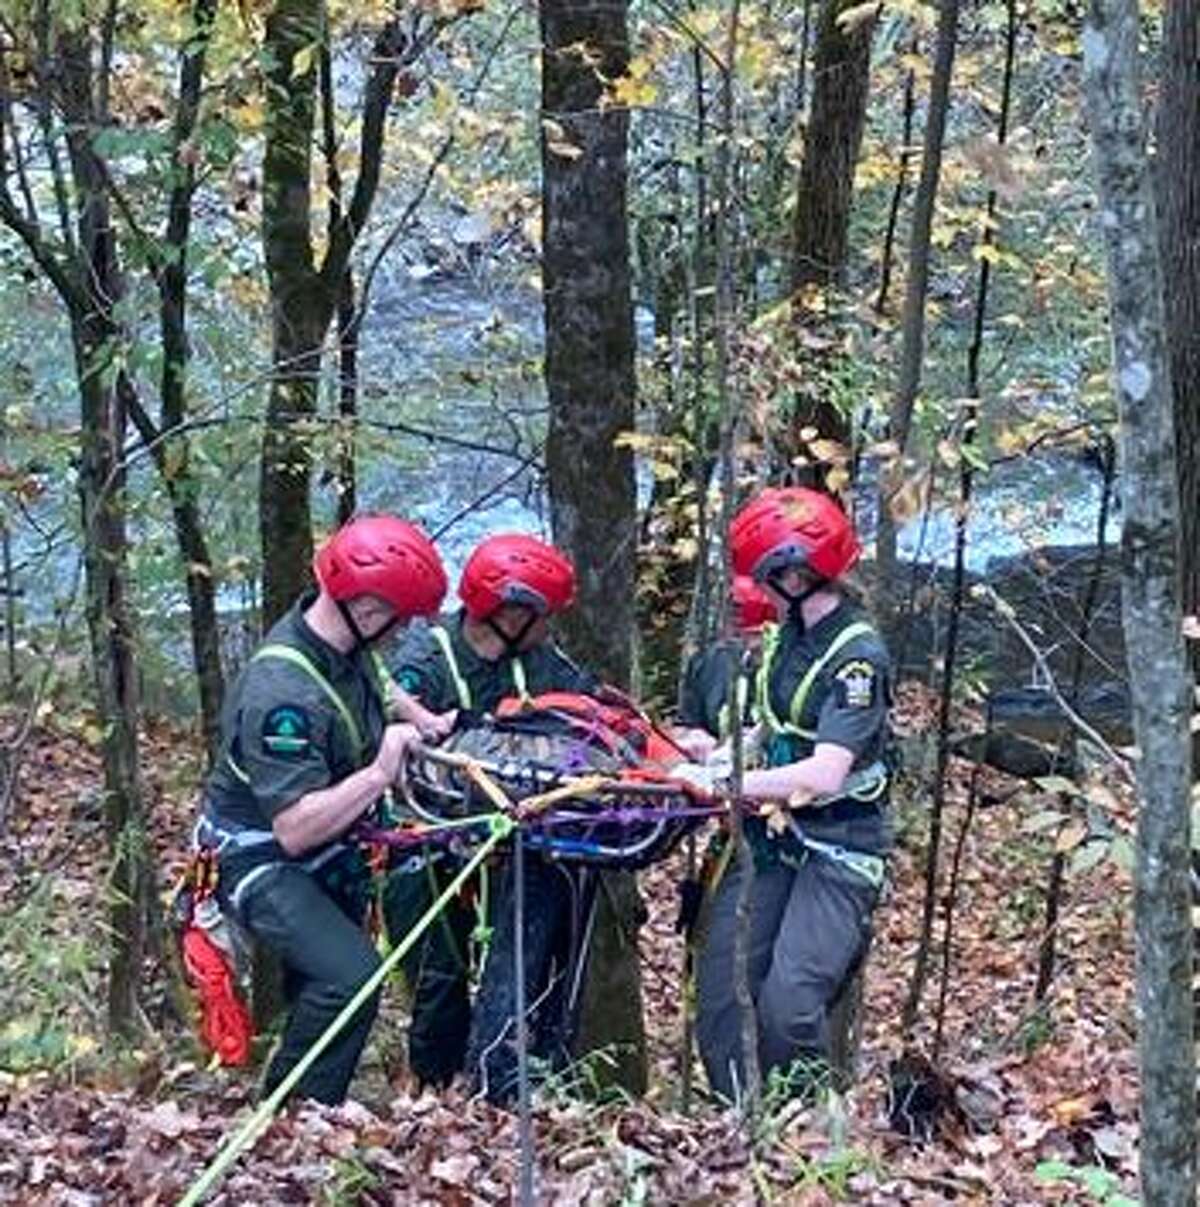 As well as conducting searchers, forest rangers recently practiced rope rescues.